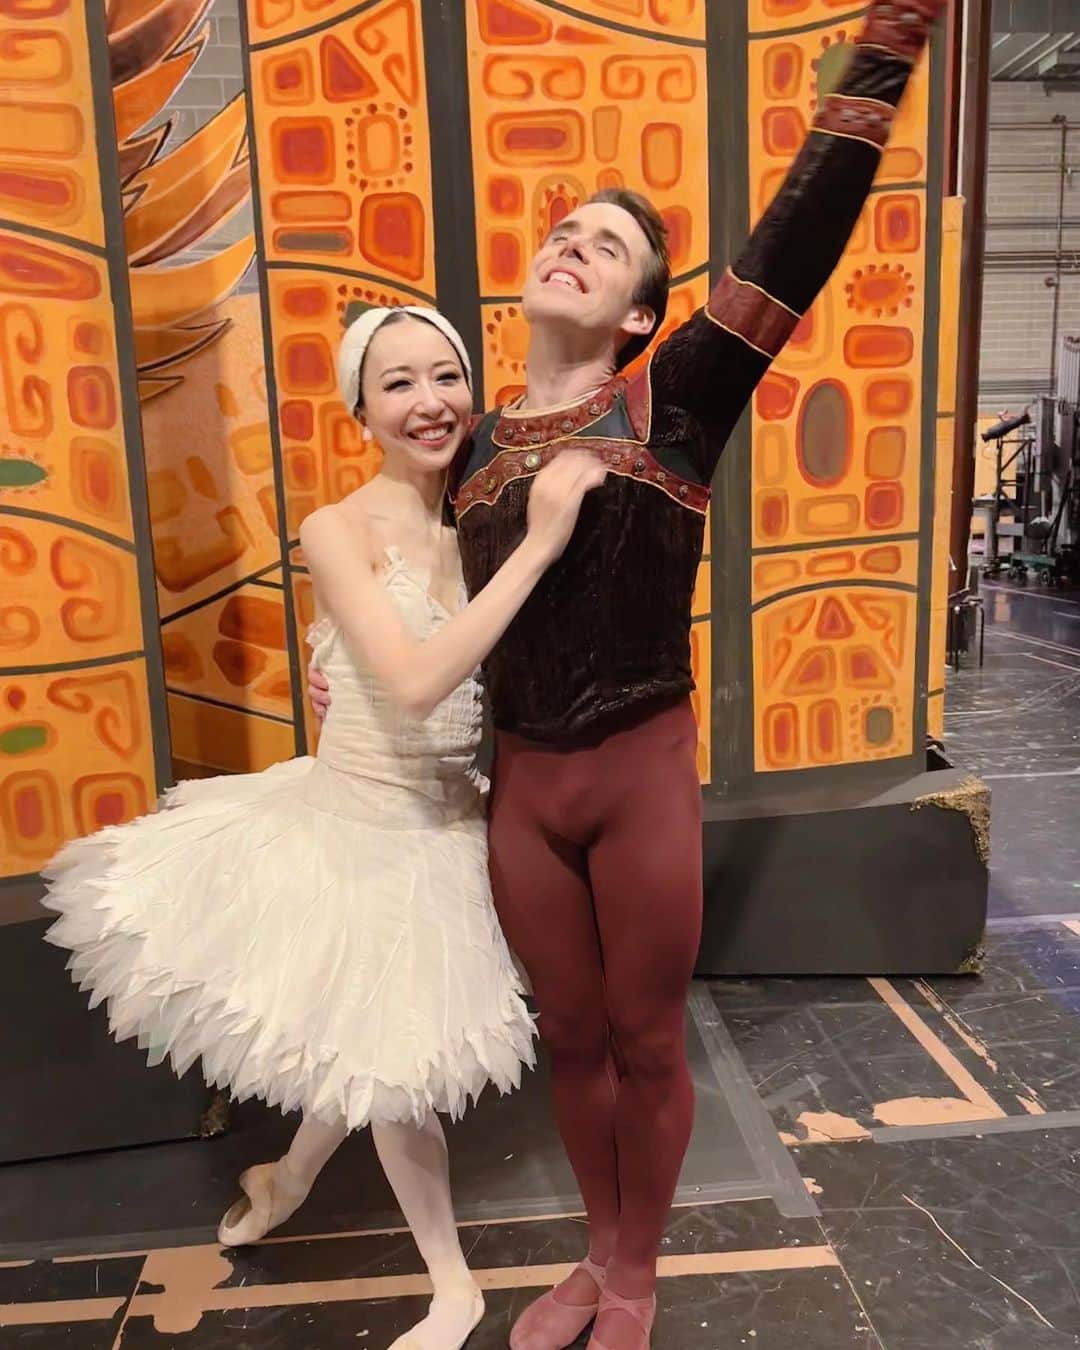 加治屋百合子のインスタグラム：「・ Price @connorlwalsh came back from his injury and with only a slight delay, we were able to perform our last show of “Swan Lake” and finished the 2022-2023 season!  It wasn’t easy waiting and not knowing if or wouldn’t perform🙈🦢 I enjoyed every moment sharing the stage with everyone @houstonballet 💓  “Swan Lake” is one of the ballets that I really struggled with when I first premiered a few years ago. I always thought I’m not suited and was not confident with how I looked. After spending many hours in the studio trying to find my own inner “Swan” and few years later… We can always be better, but I was happy with my progress and with my shows of “Swan Lake” this season🦢 Until next time.    I did also have the legendary Irina Kolpakova coaching me through FaceTime telling me, “Yuriko. More!” 🤣  Thank you all for the love and support🩷   コナー王子が怪我から復帰❣️ 今シーズン最後の演目「白鳥の湖」を先週末に無事一踊に踊ることができました🩷  怪我の回復を待つ間は、キャスト変更が続き、いつ踊れるのか分からなかった💦身体のコンディションと気持ちを保つのが大変でしたが、舞台ではお互いにベストを尽くし🦢楽しい時間を過ごせました☺️  正直なところ数年前に初めて踊った時は、自分の容姿で白鳥のラインが出せるのか不安で、自分には「白鳥」は似合わないと思っていました。たくさんの自主練と経験を積み、今シーズンは自分なりの「白鳥」に近づけたと実感できました😌  自主練では、ニューヨークのイリーナ・コルパコワがFaceTimeで「ユリコ、もっと〜！」と叫んでいました🤣  また来シーズンも頑張ります！ いつもたくさんのLOVEと応援をありがとうございました💓  🤍🦢 @aoi__fujiwara25 @kellenhornbuckle @emma.forrester @gretelbatista @yumi_fuku118 @alyssalspringer @kali_kleiman @ajwalton2 @_do_re_mimi @allydancer_123 @alexandria.heath @layla_porter   🖤🦢 @chaechae91 @danbikim_0419 @natisacoolkid @jindallaefairy」